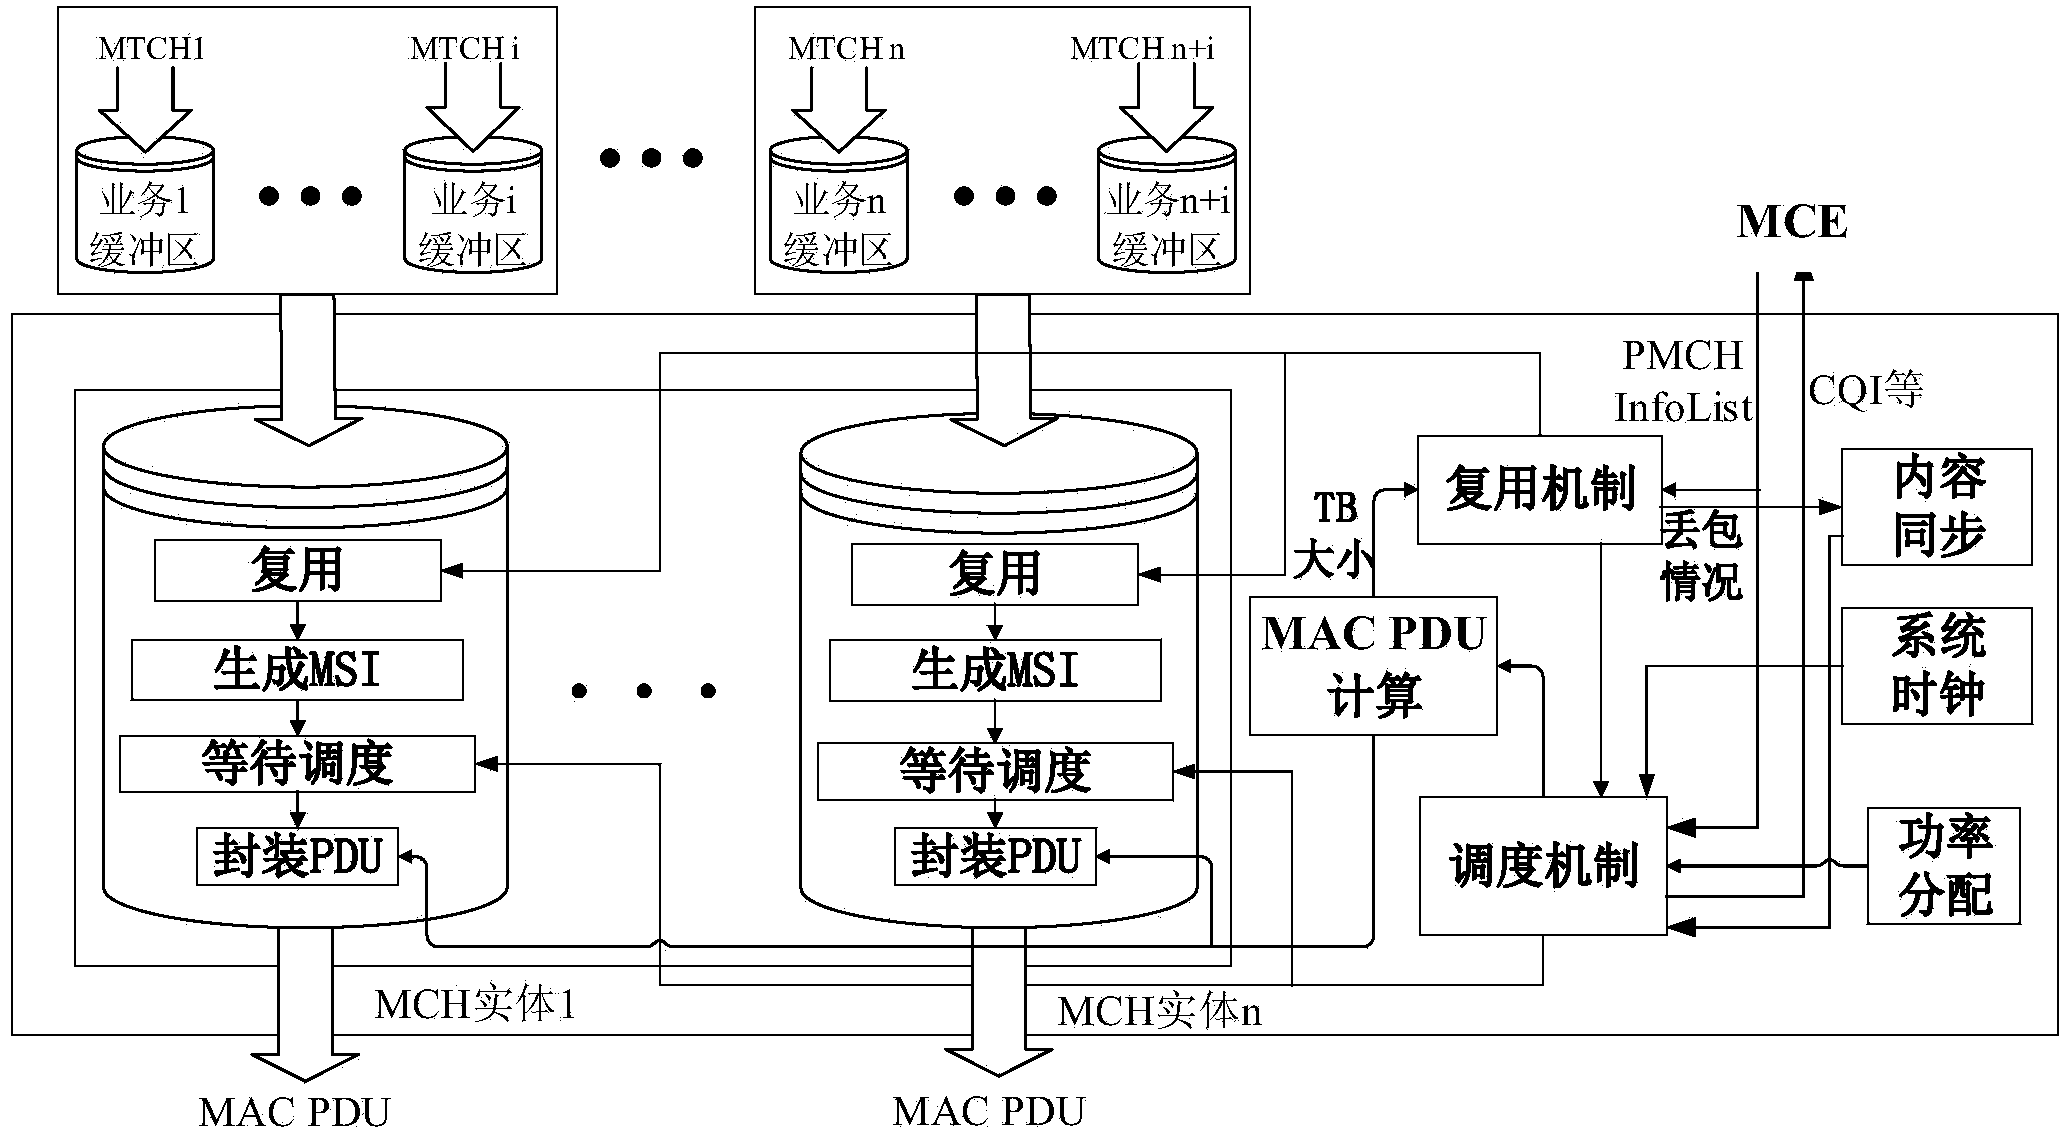 System for processing MBMS service by base station MAC layer in LTE system